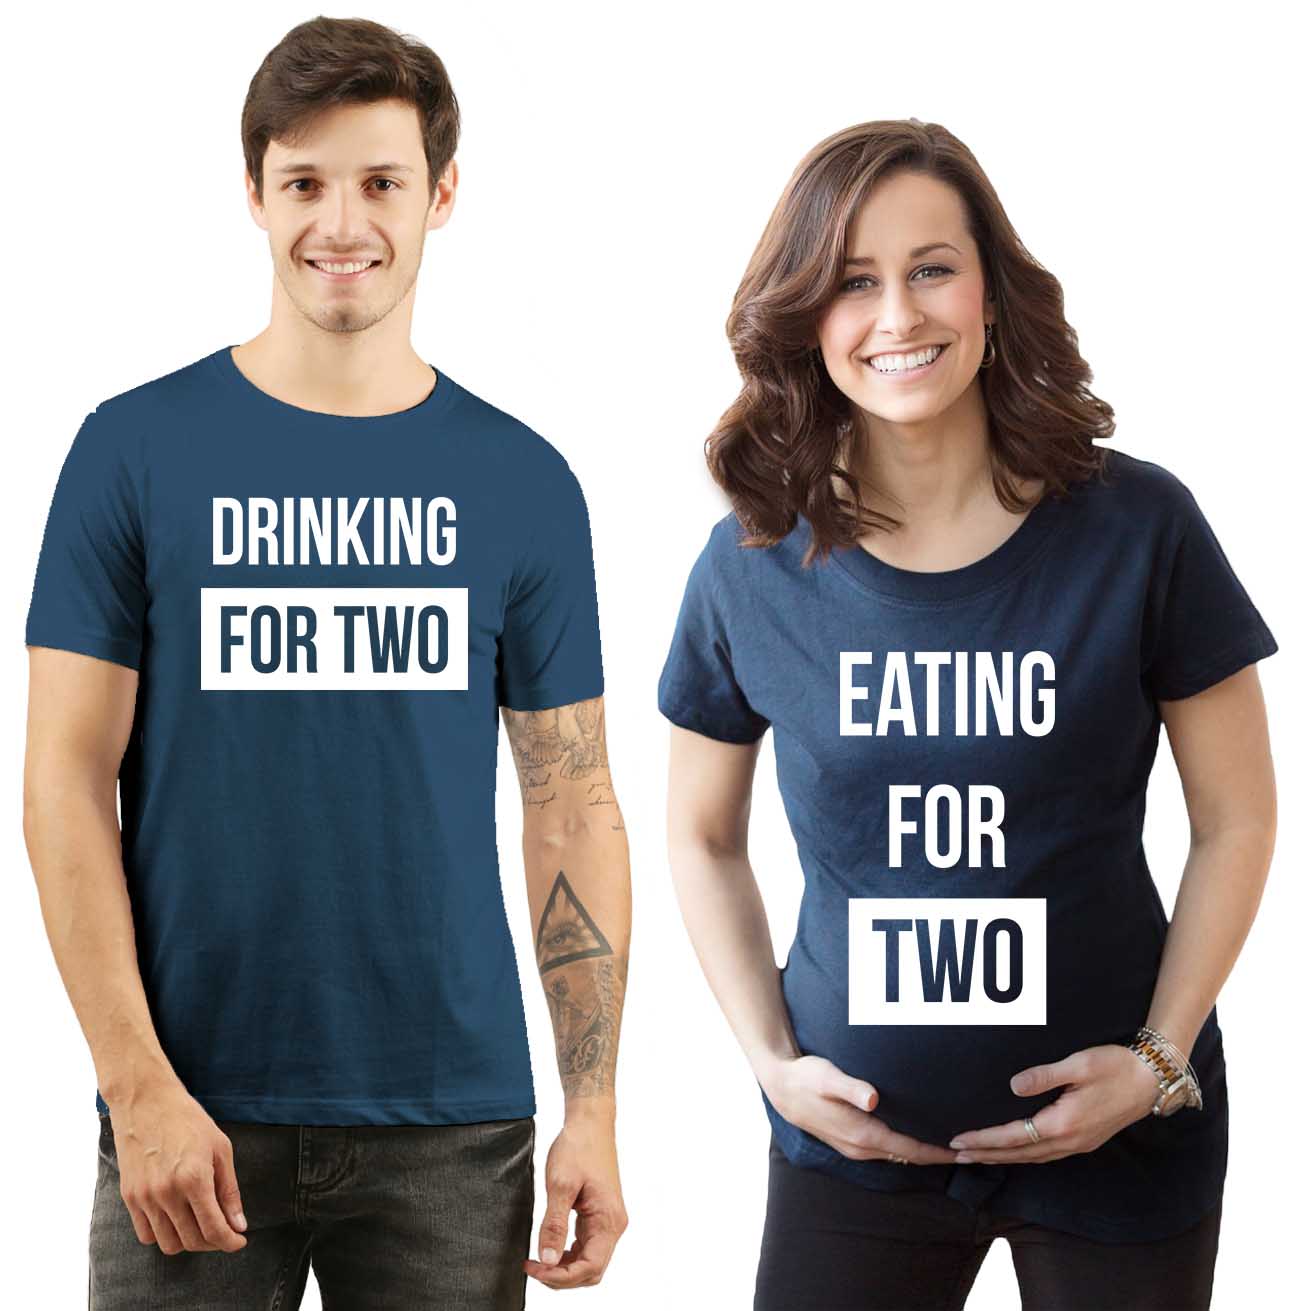 jopo maternity photoshoot ideas poses props indian pregnancy announcement quotes Proud Eating Drinking for two couples goal Matching T-shirts Navy Blue